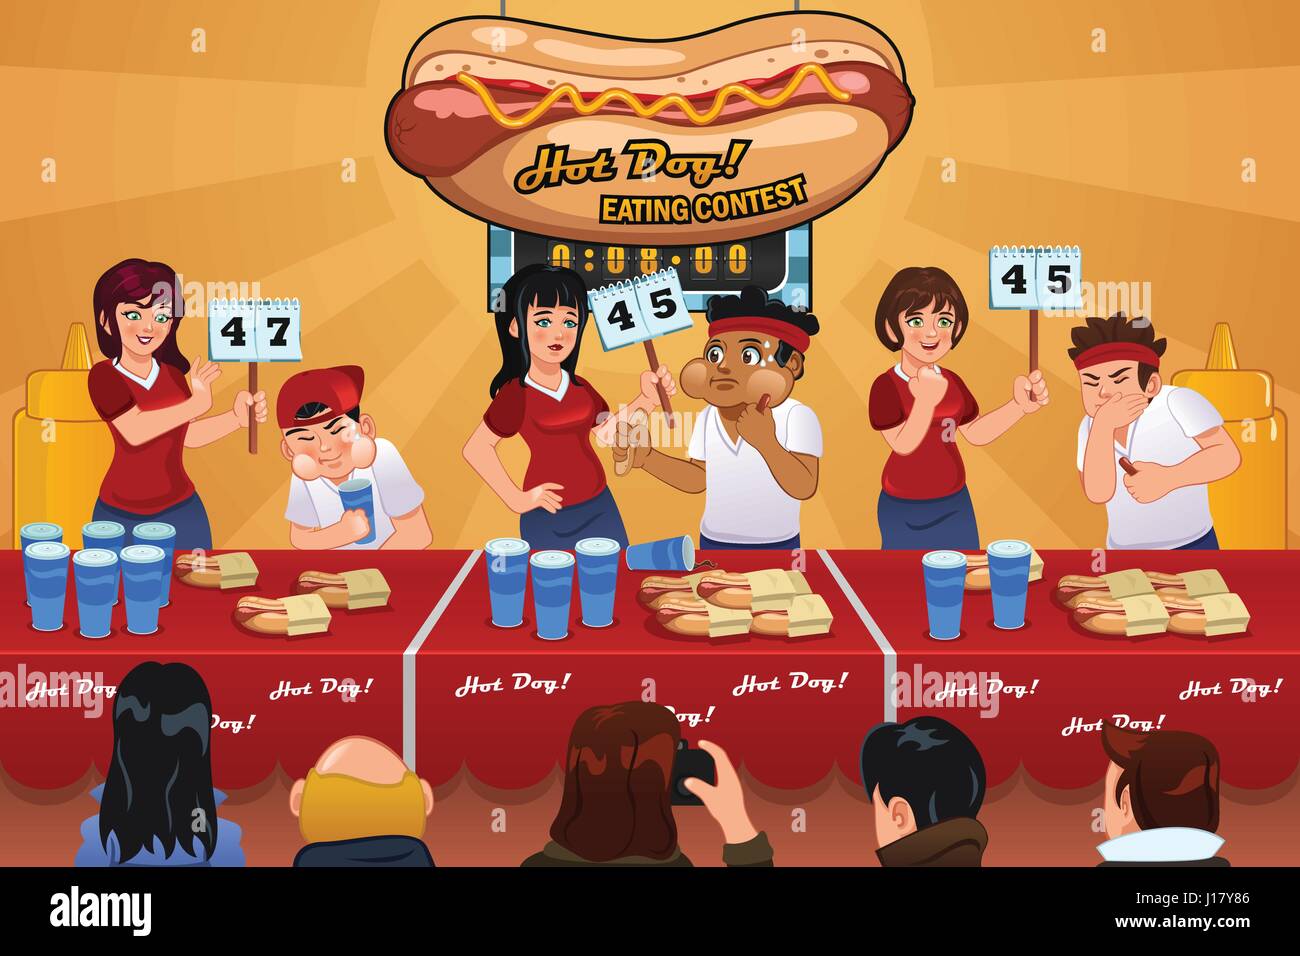 A vector illustration of people in hotdog eating contest Stock Vector